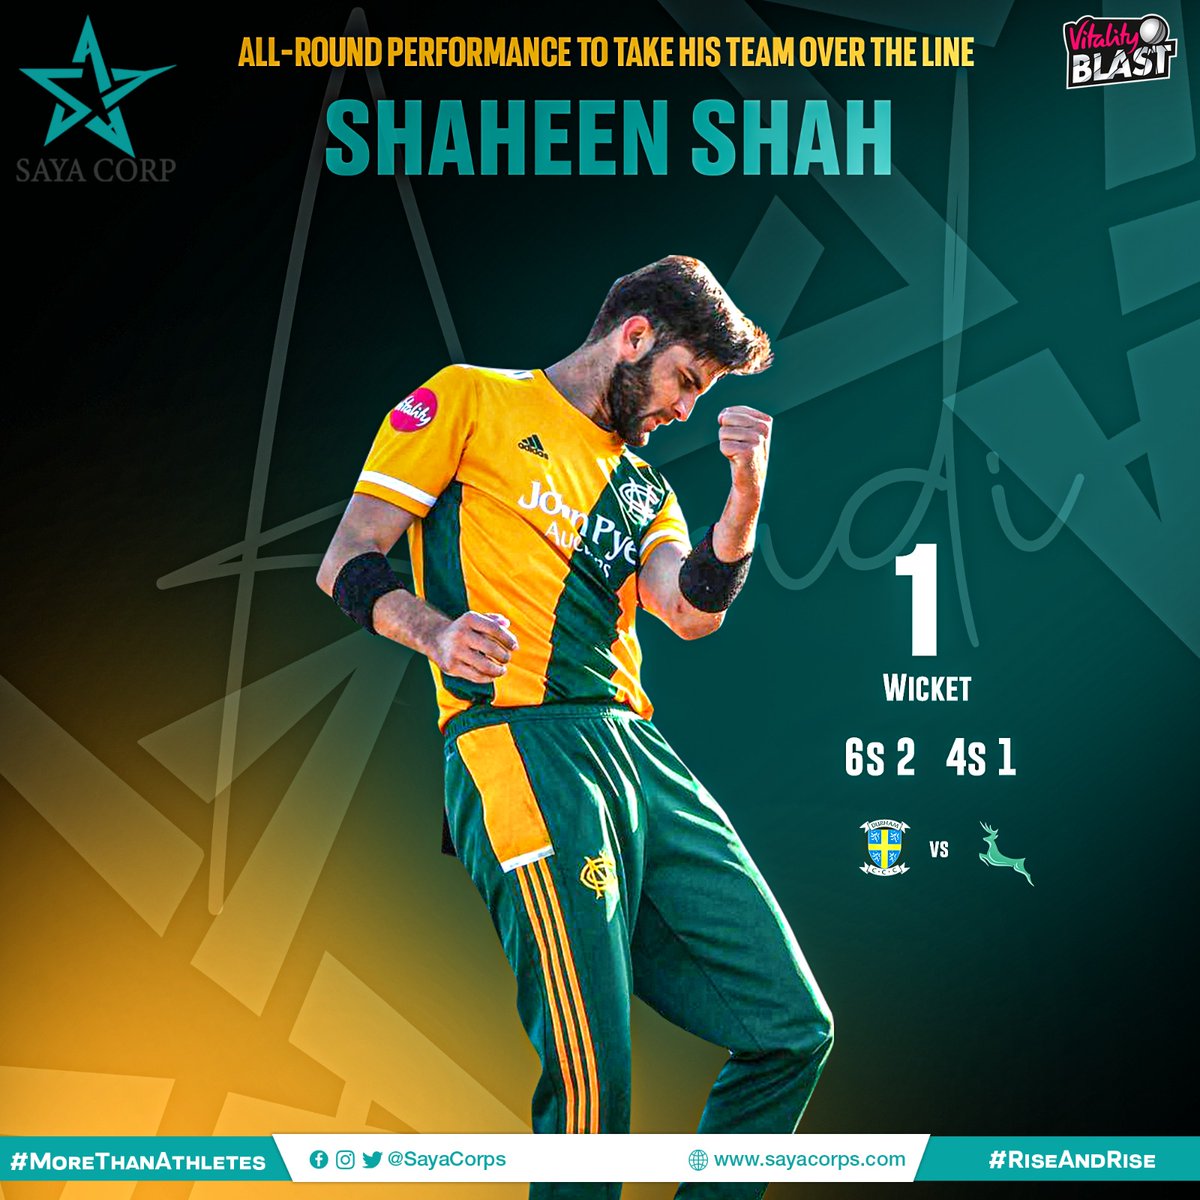 Welcome to #TheEagle All-rounder Era! 💥

@iShaheenAfridi was magical last night picking up an important wicket and smashing 2️⃣ sixes & a four to finish the game in style 😎

#SayaCorporation is delighted and wishes you more #RiseAndRise!

#MoreThanAthletes @TalhaAisham